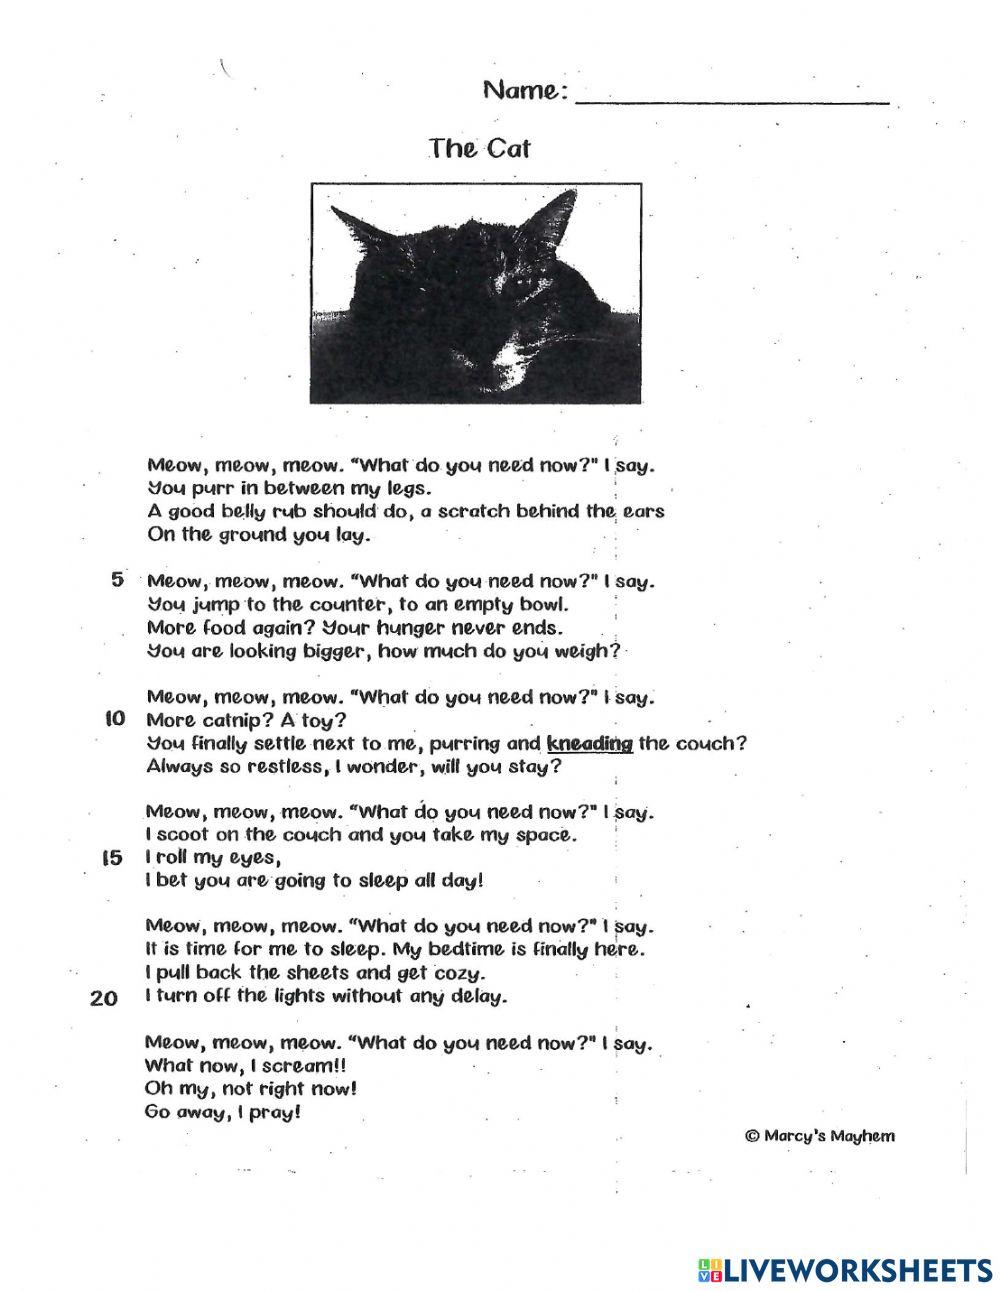 The Cat - A Poem